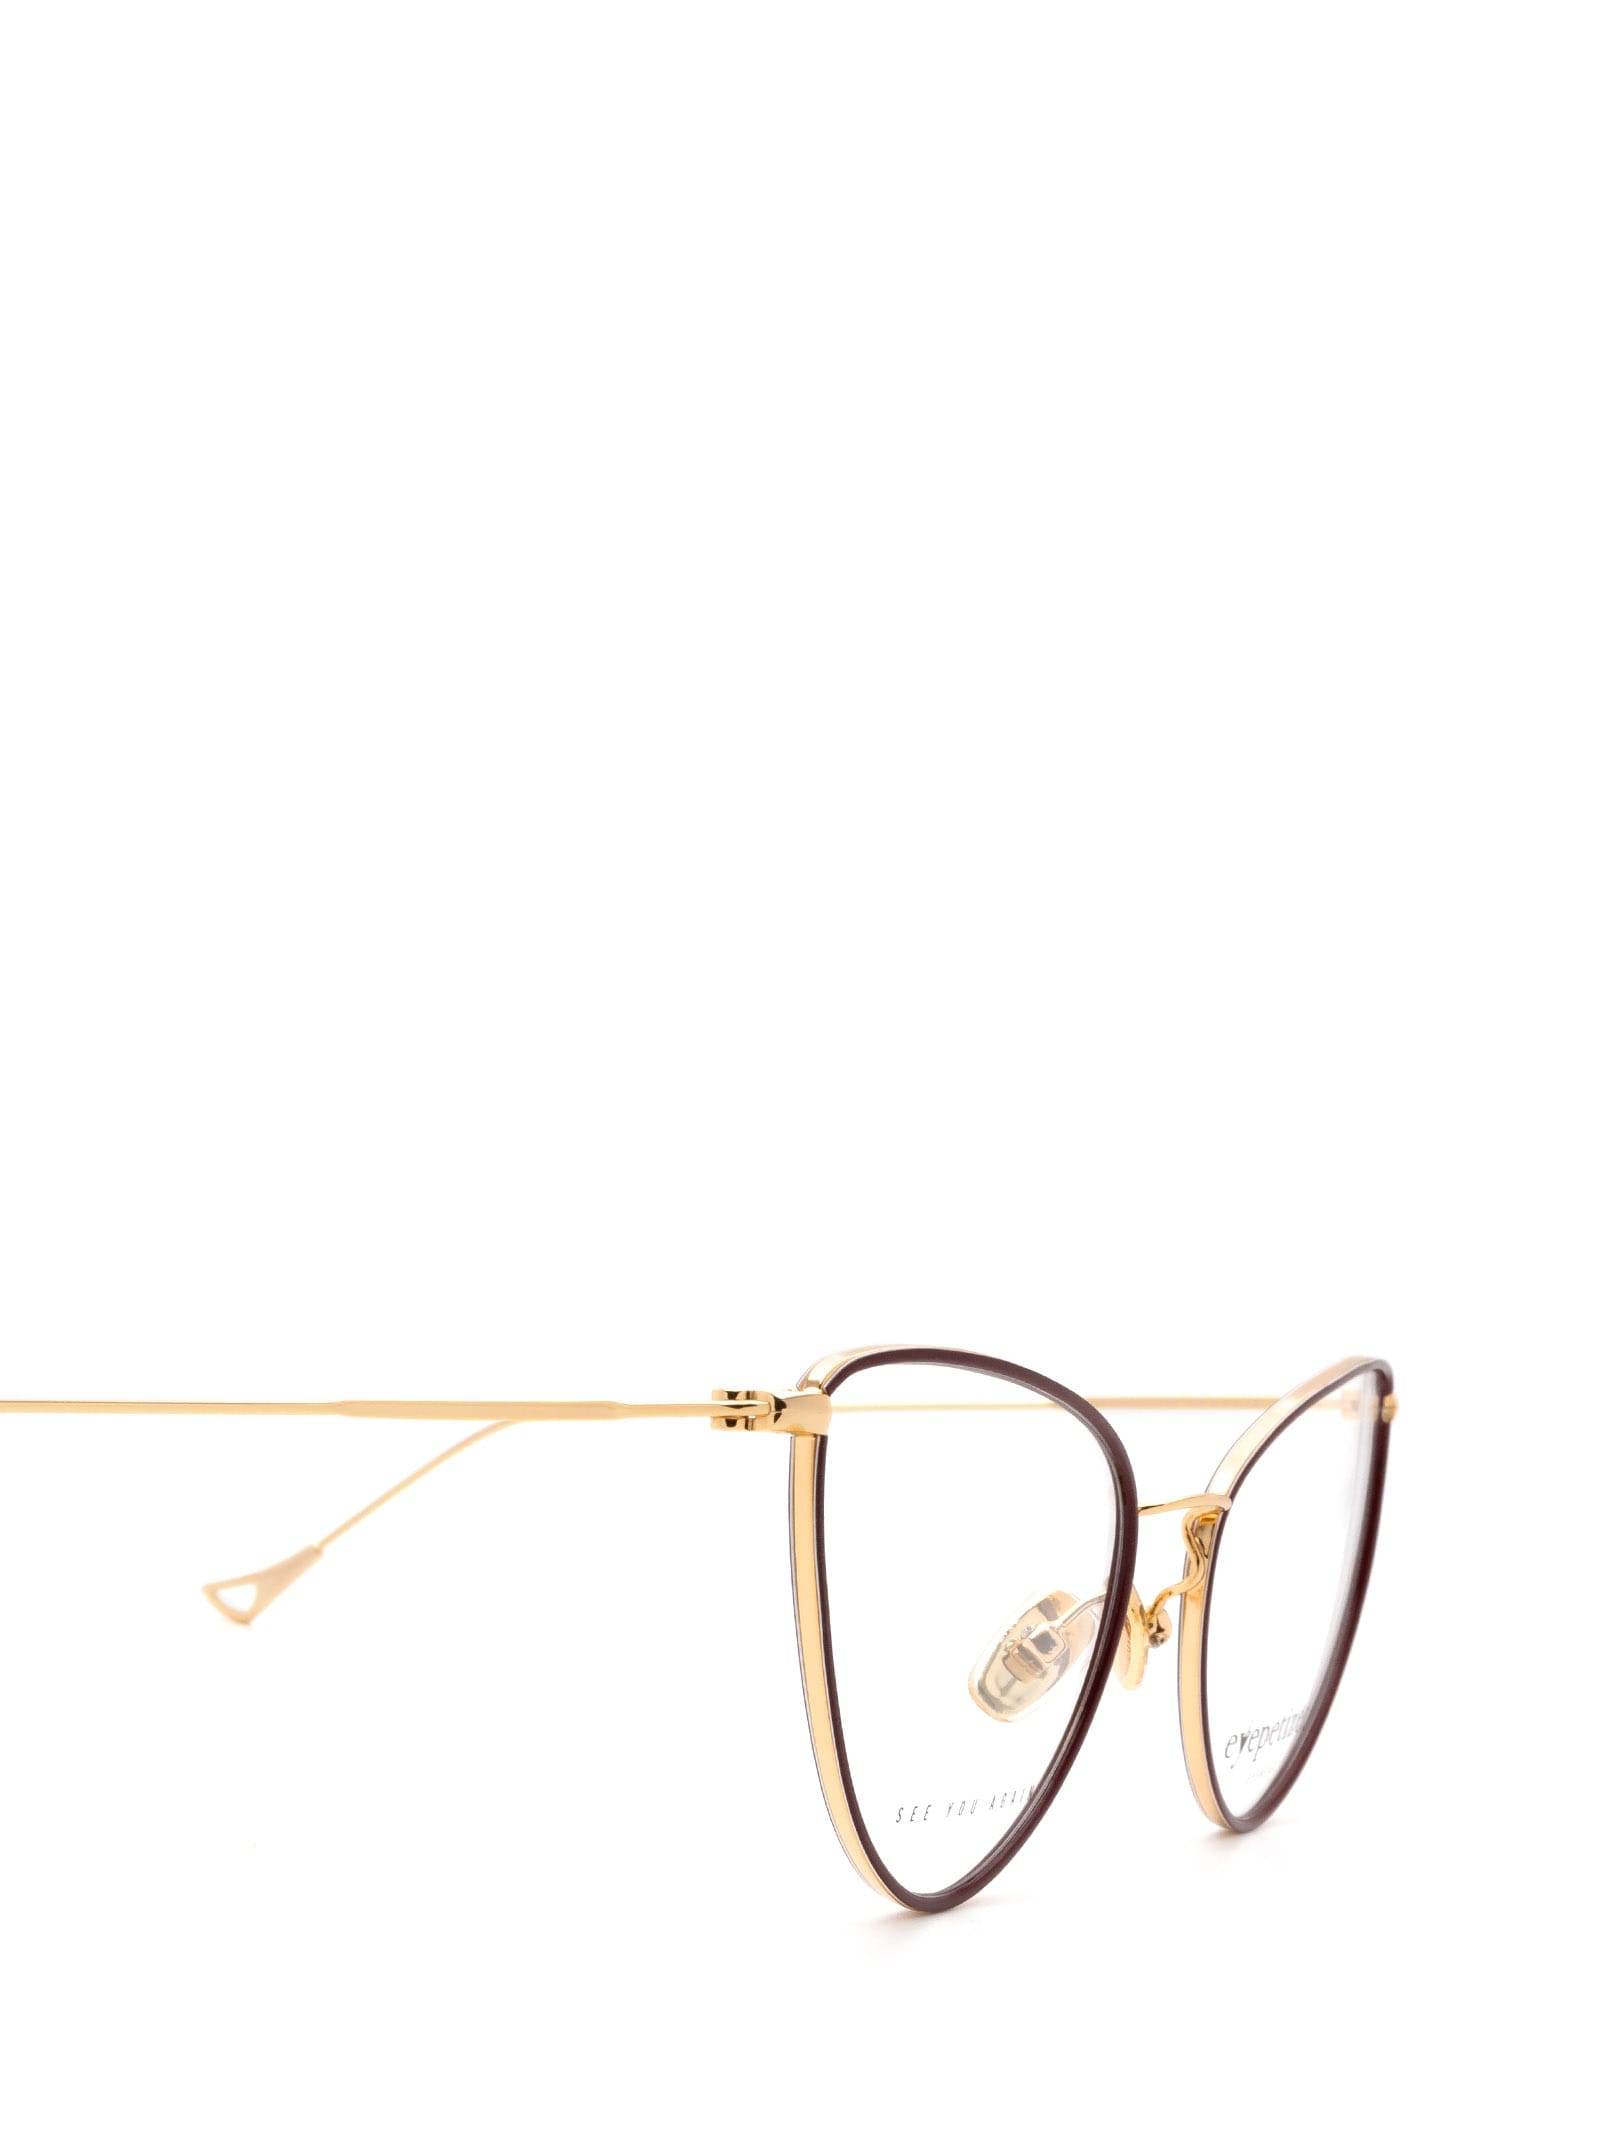 Shop Eyepetizer Cecile Brown Glasses